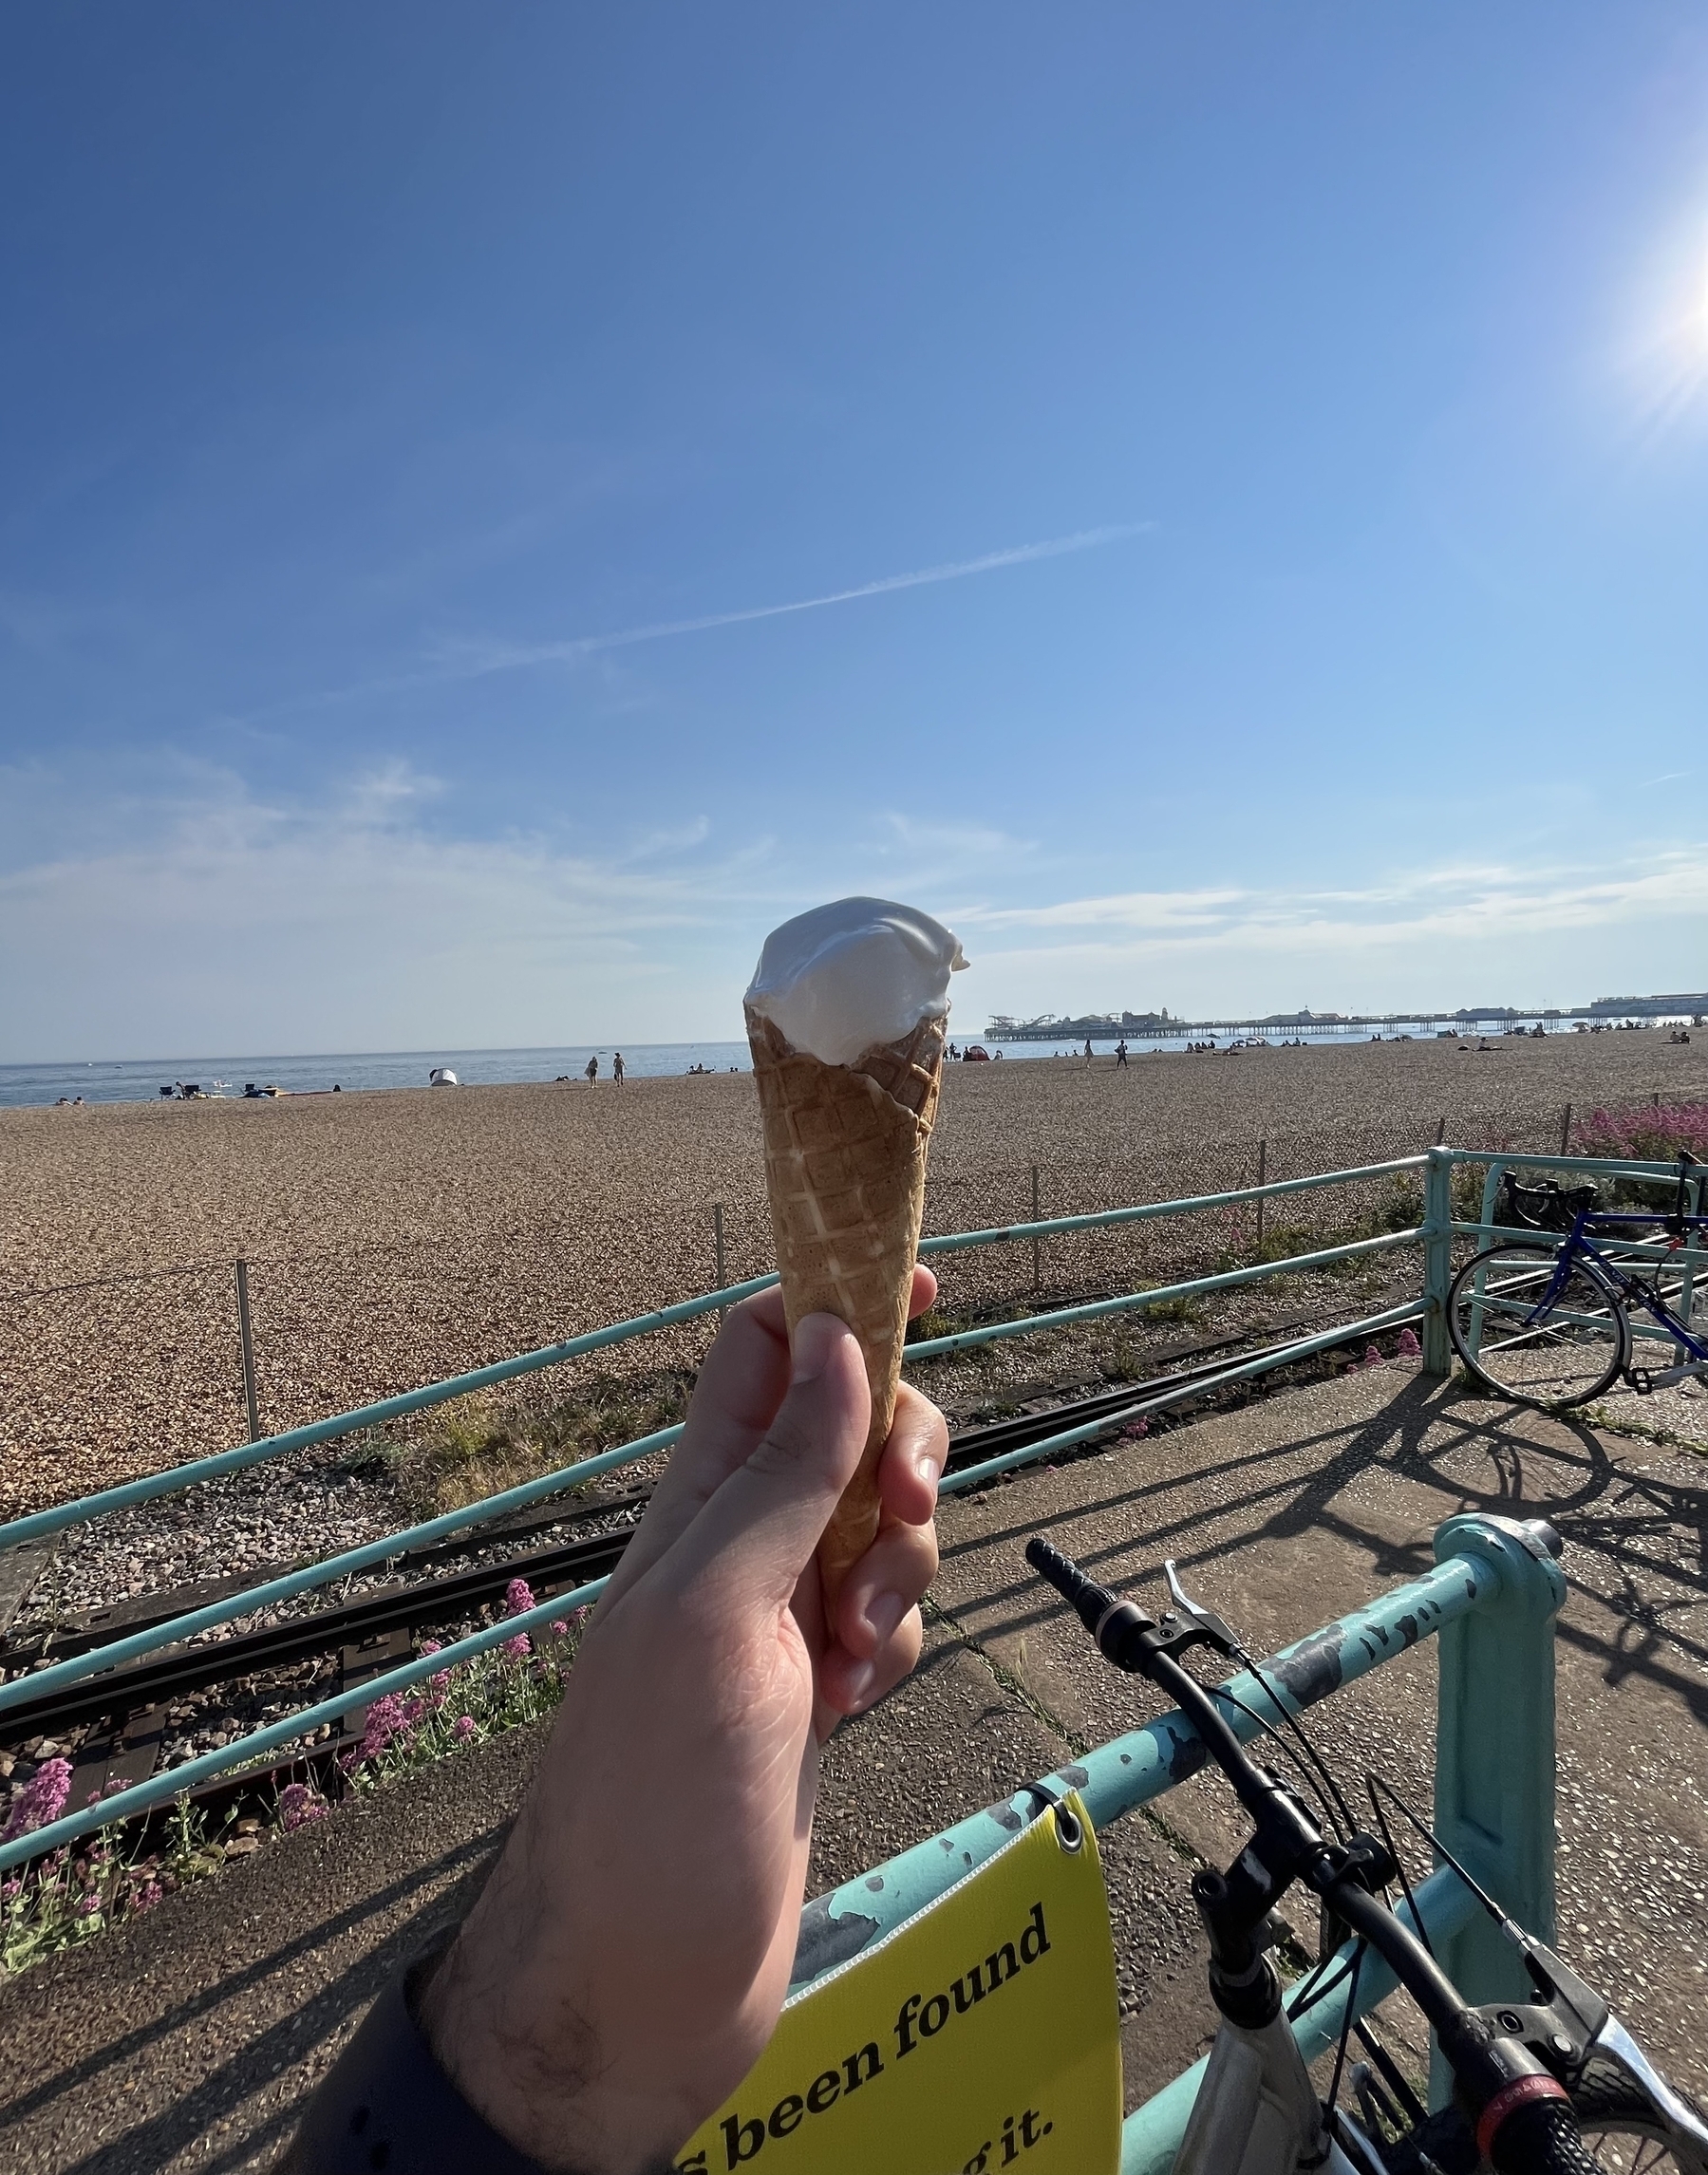 Holding a cone ice cream against the beach with clear blue skies and the background sea